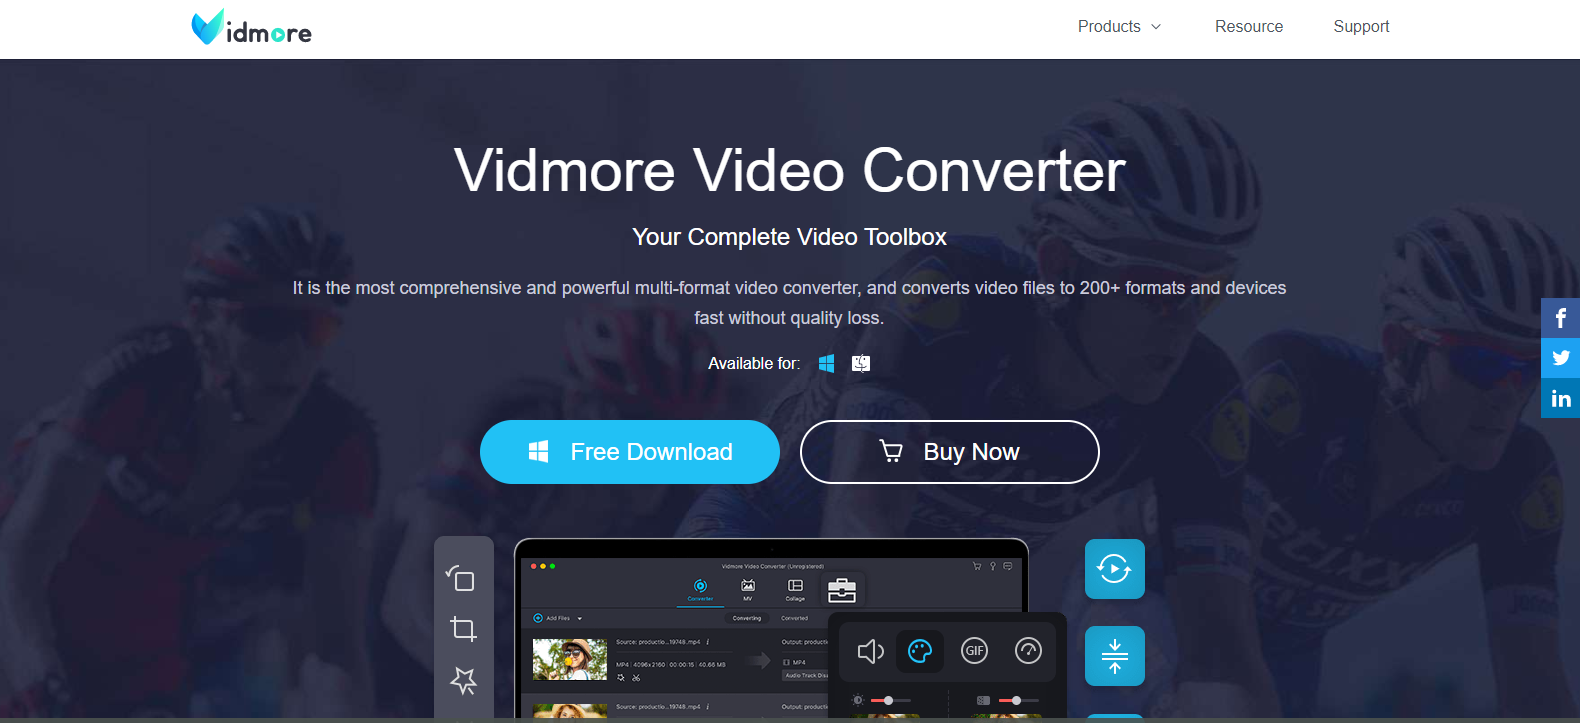 idmore-video-converter.png